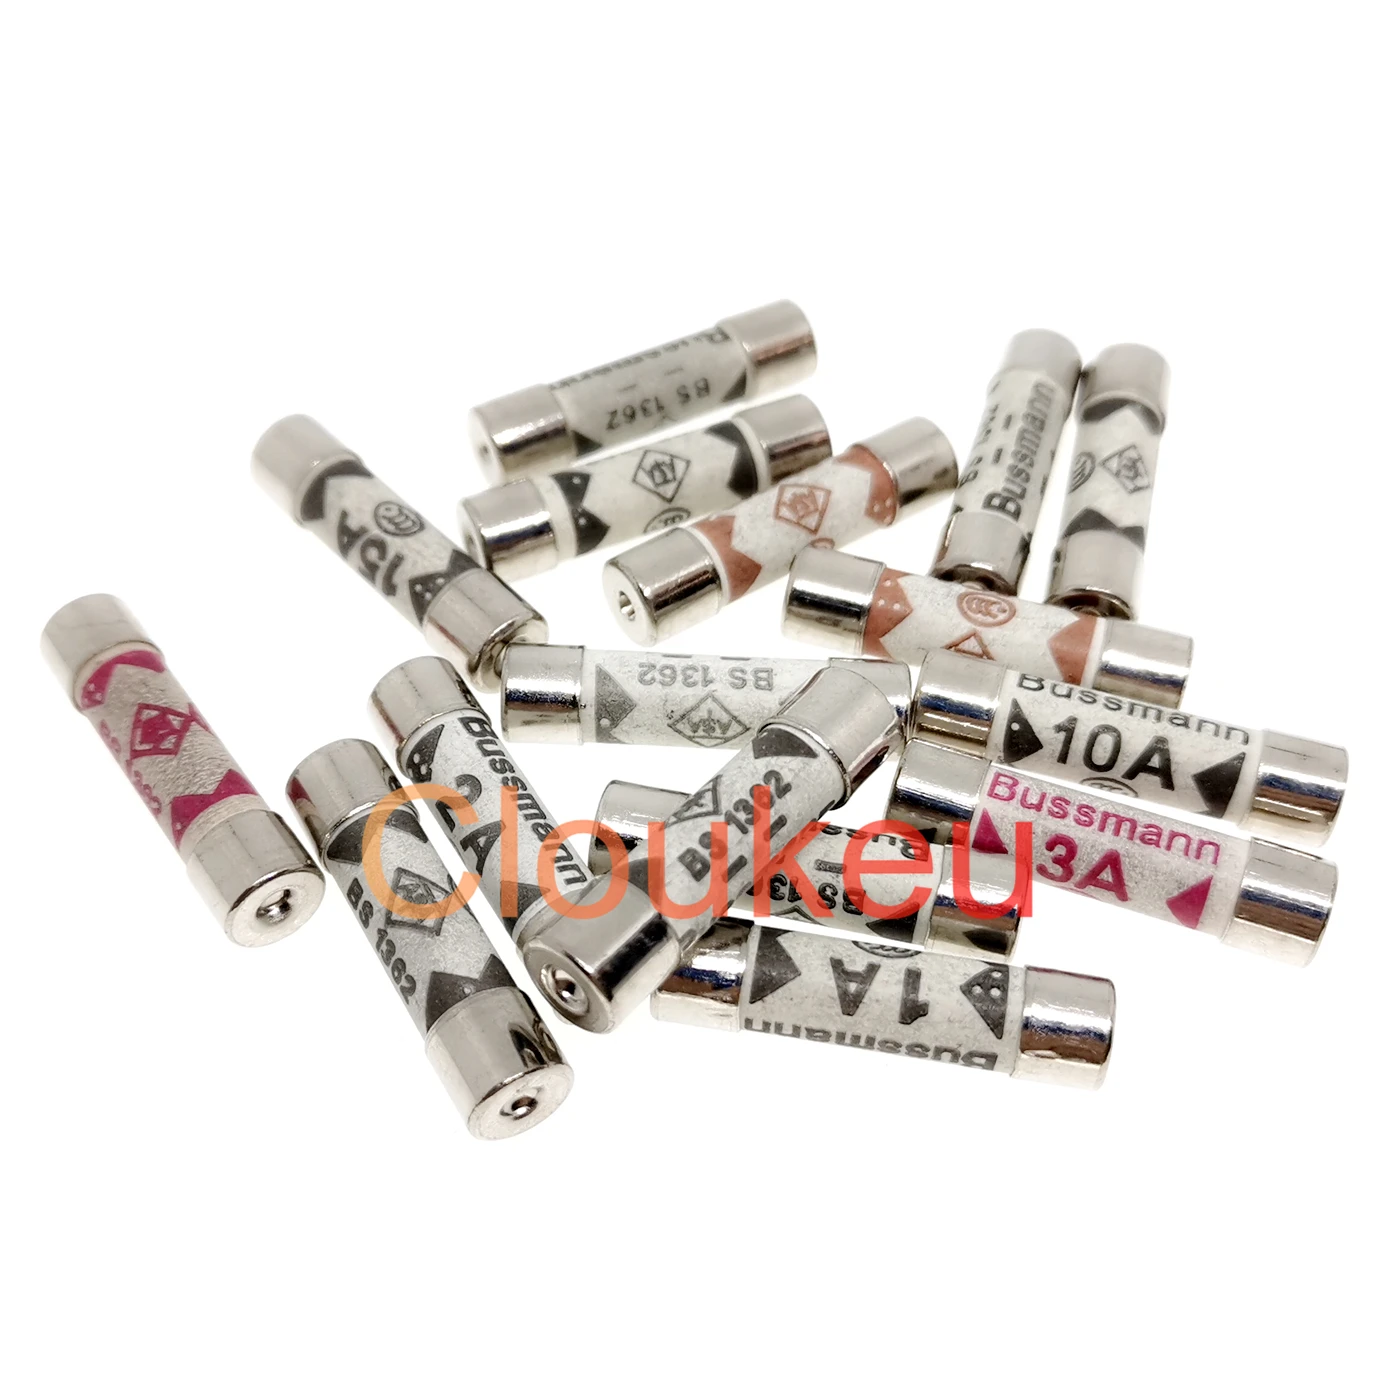 5 Amp Mains Fuses PACK OF 50 BS1362 ASTA for UK Plug